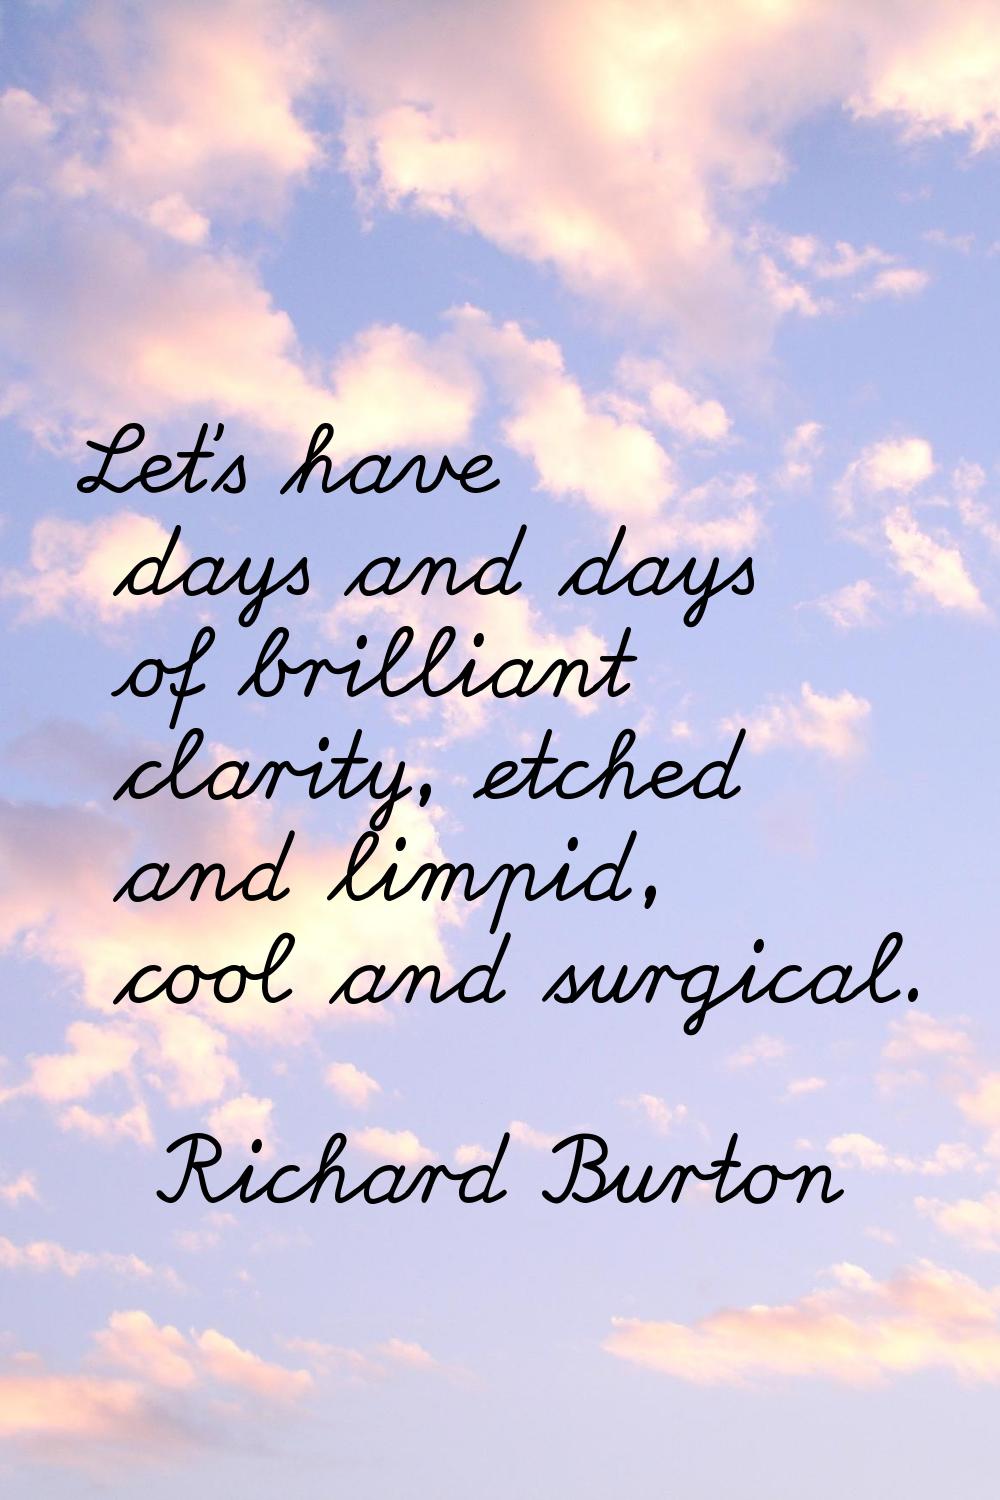 Let's have days and days of brilliant clarity, etched and limpid, cool and surgical.